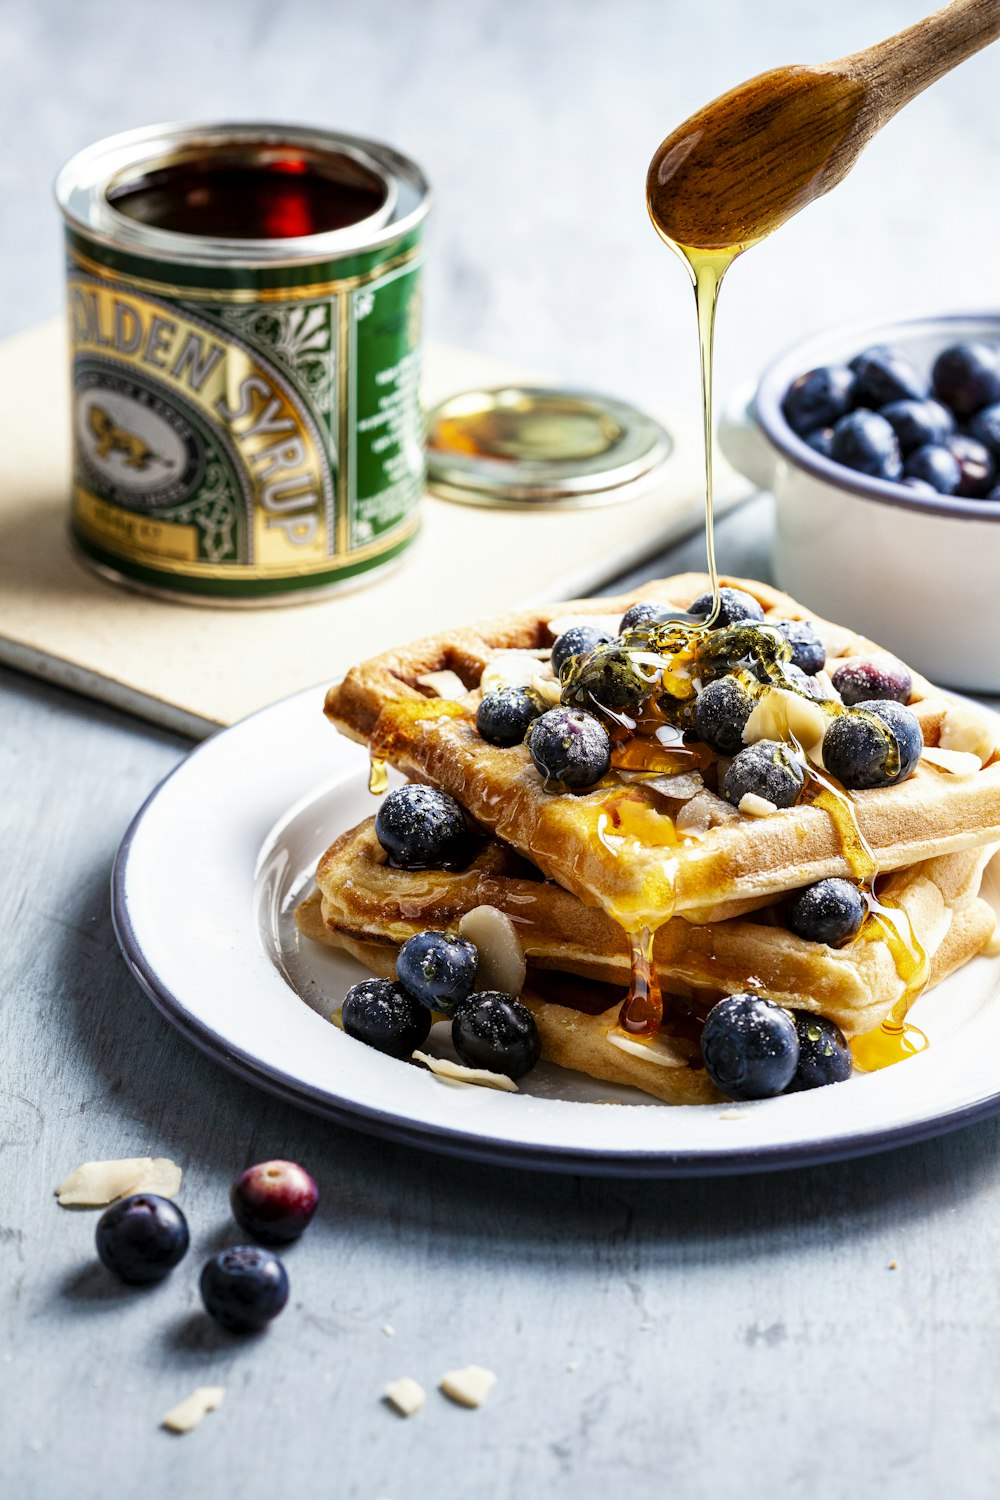 person putting honey on waffle with blueberry fruits